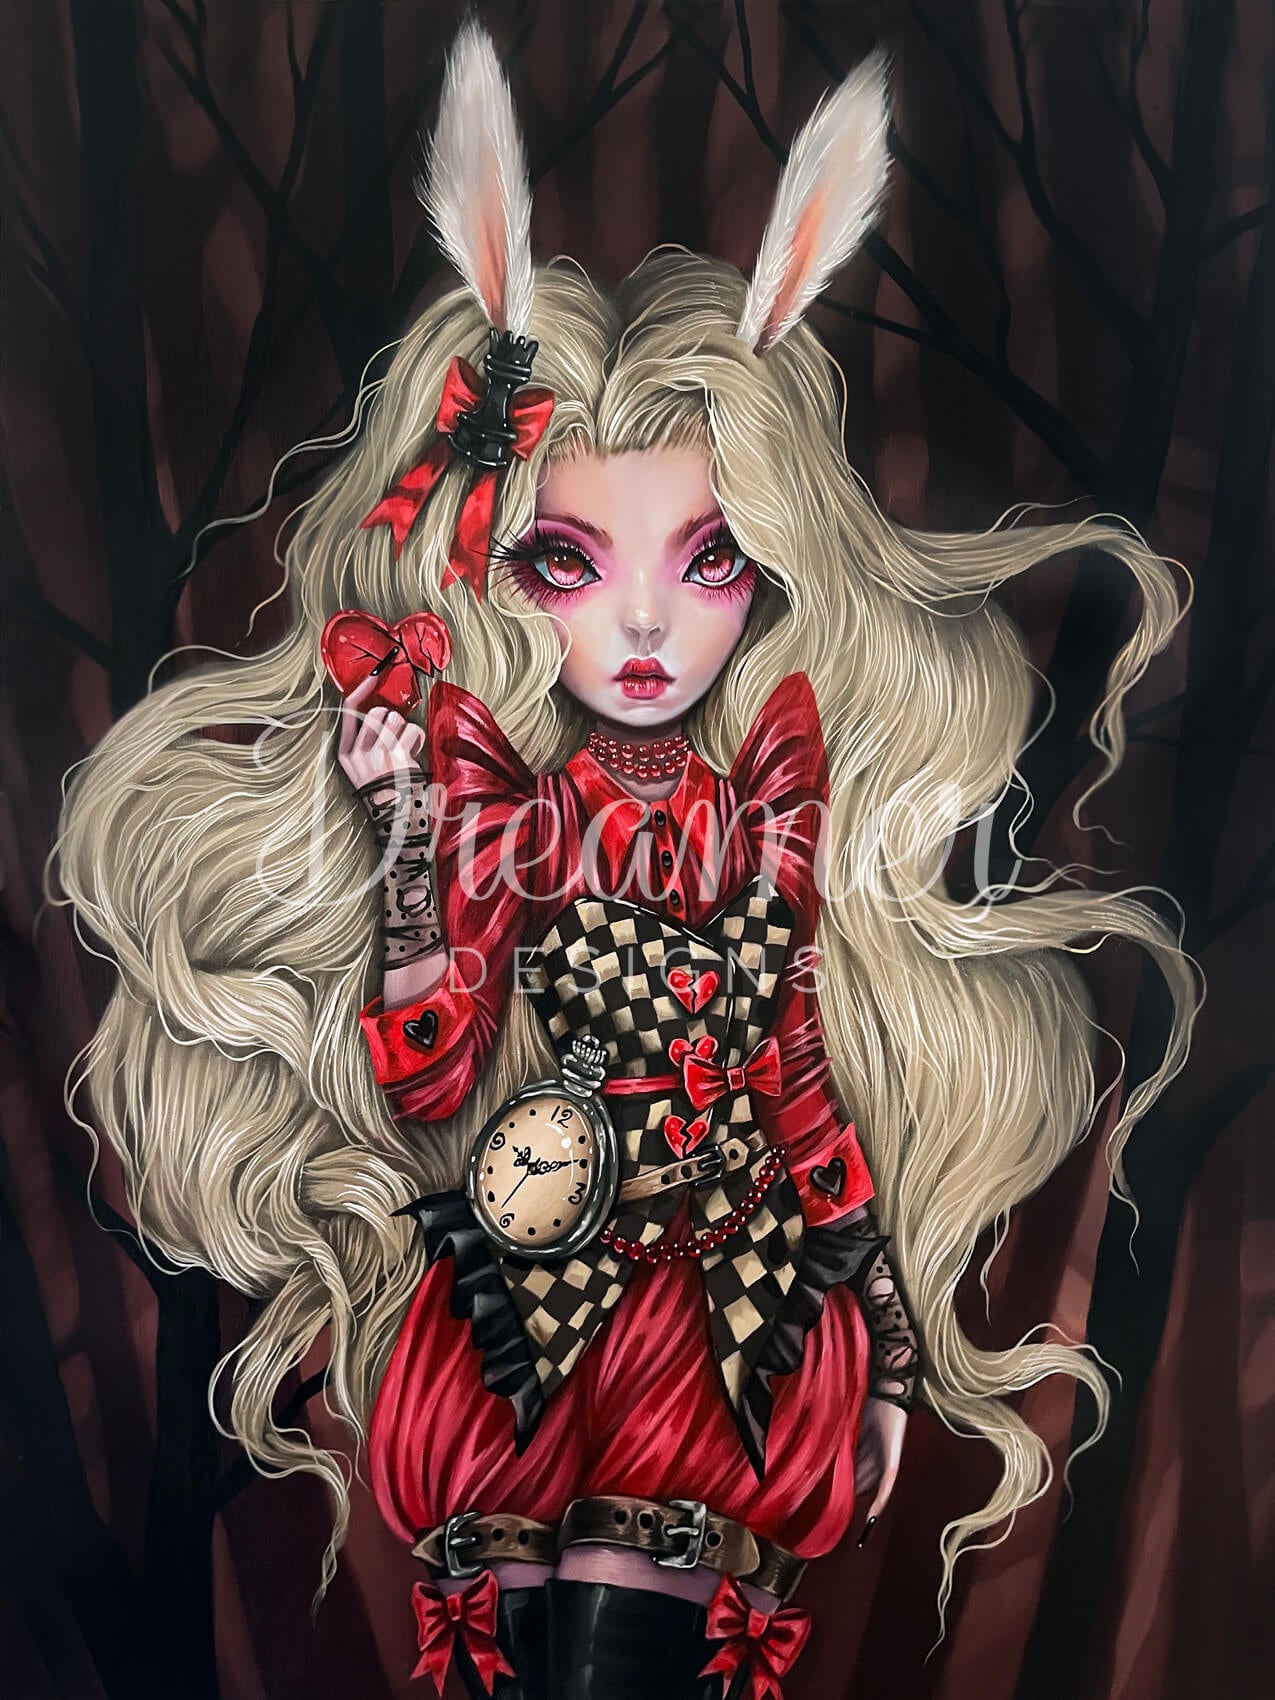 Rabbit in Red